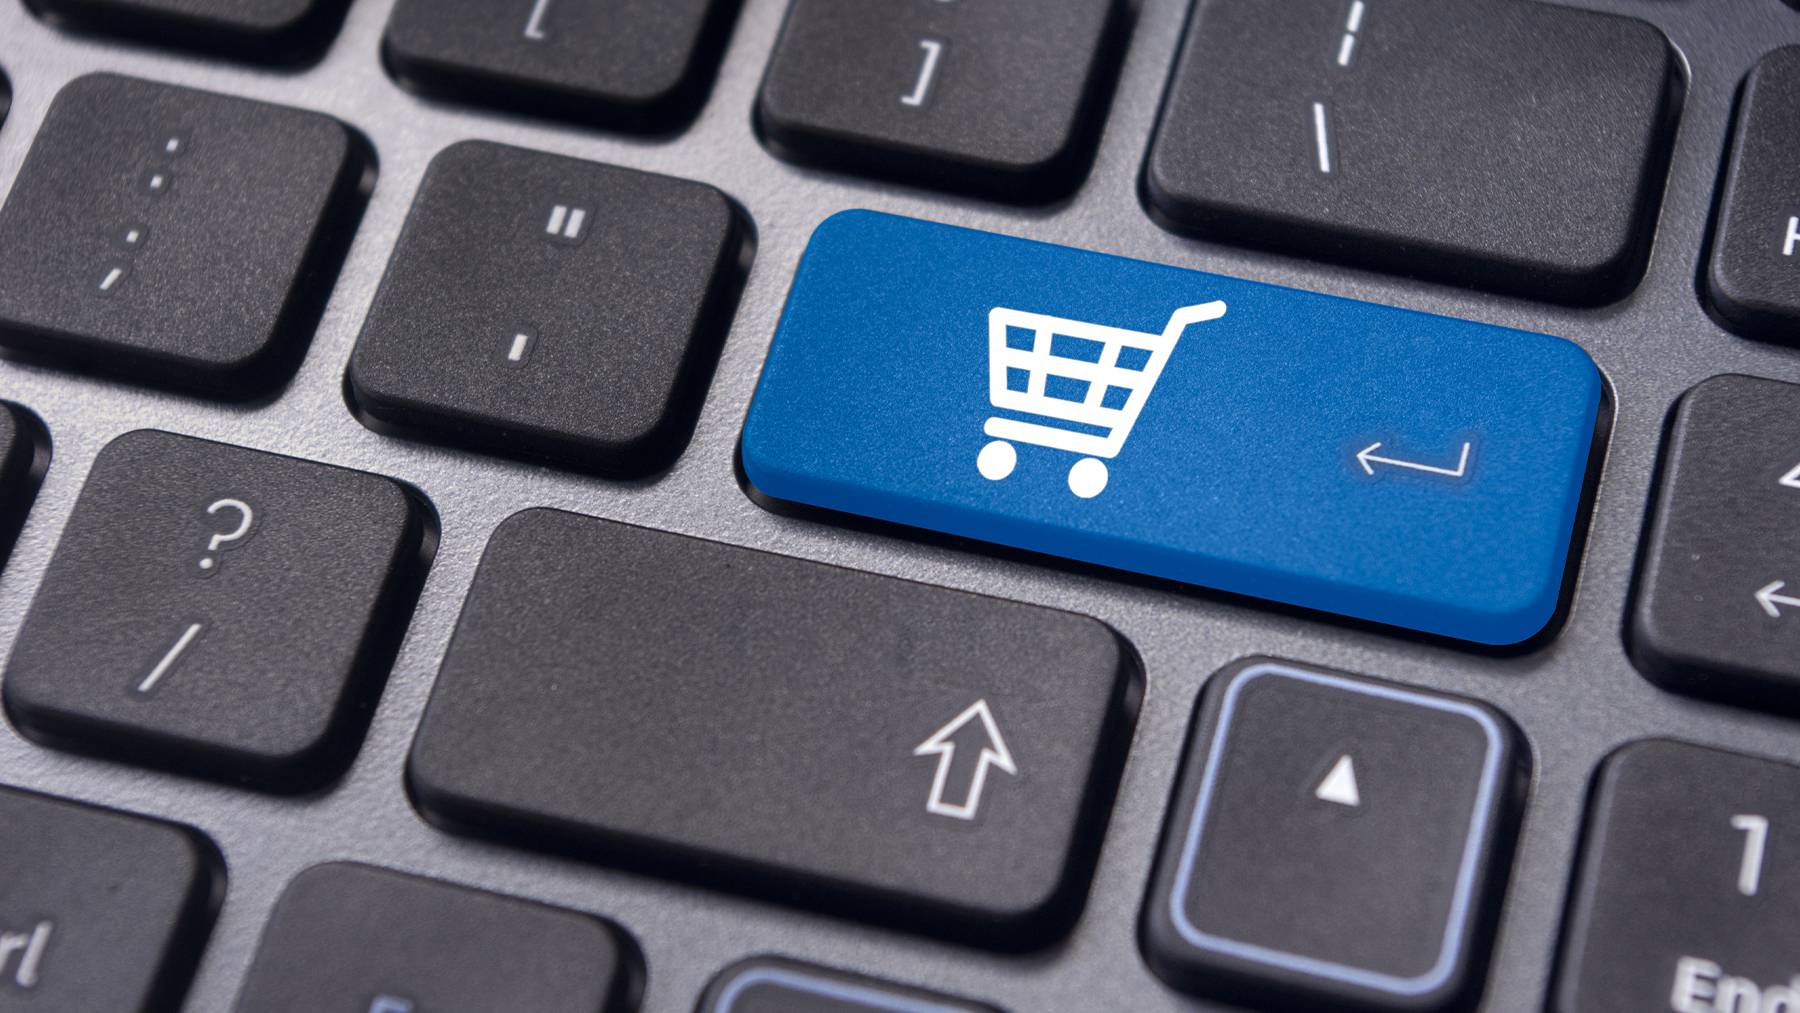 A photo illustration shows a close up of a keyboard with the "enter" button highlighted and a picture of a shopping cart replacing the text. Thanks for reading BoF!